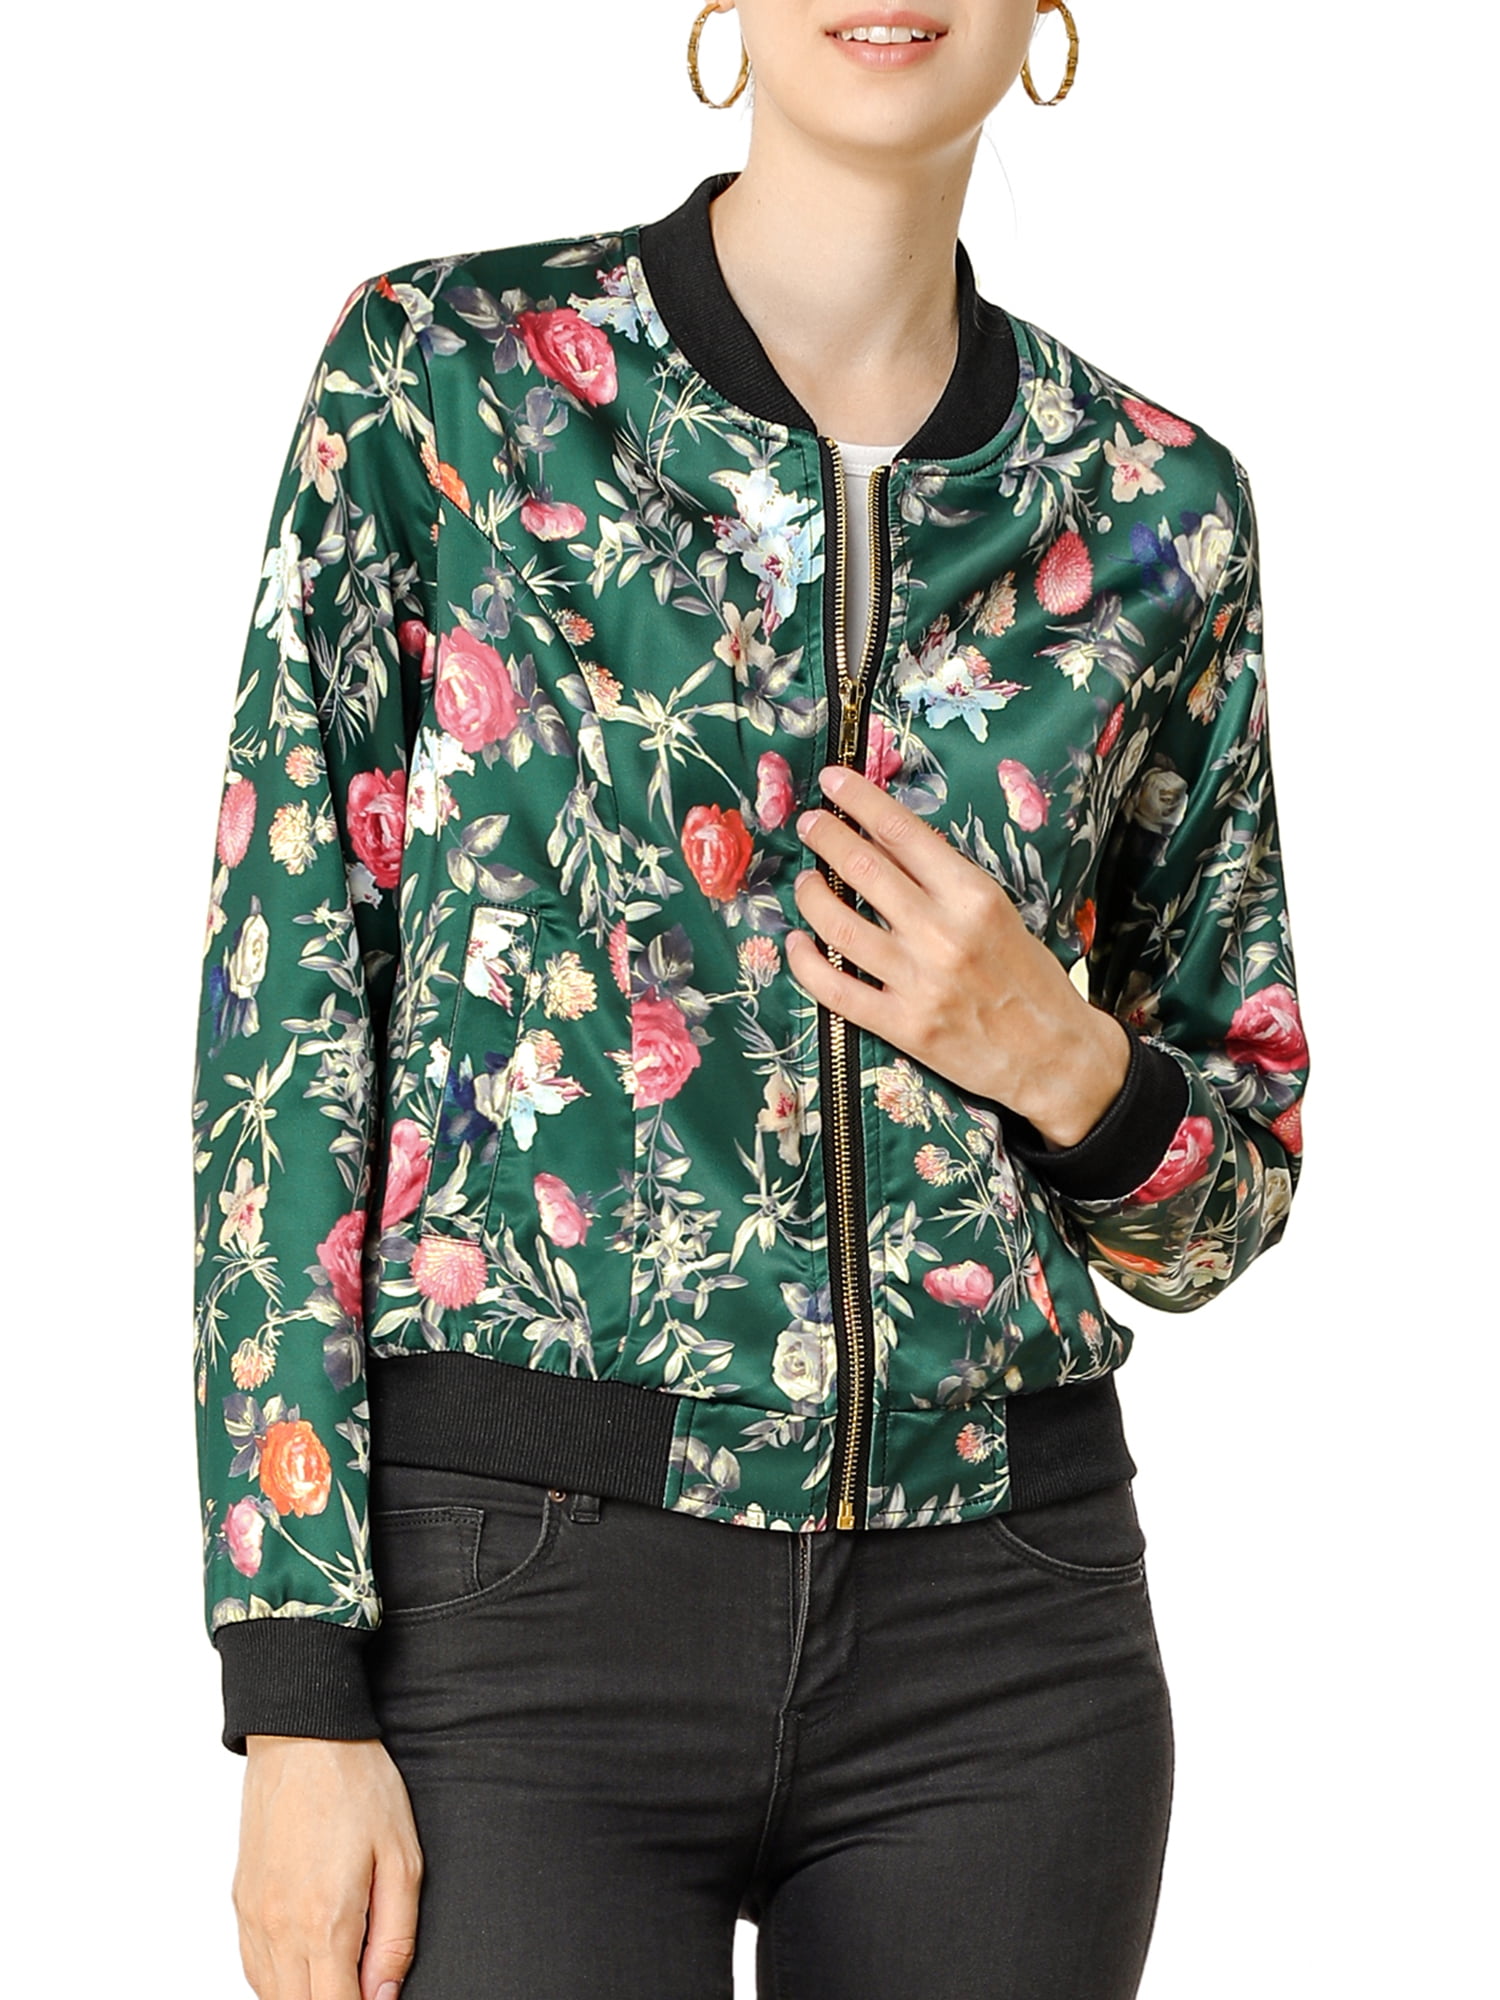 Womens Ladies Floral Camouflage Contrast Baseball Cuffed Zip Up Bomber Jacket 